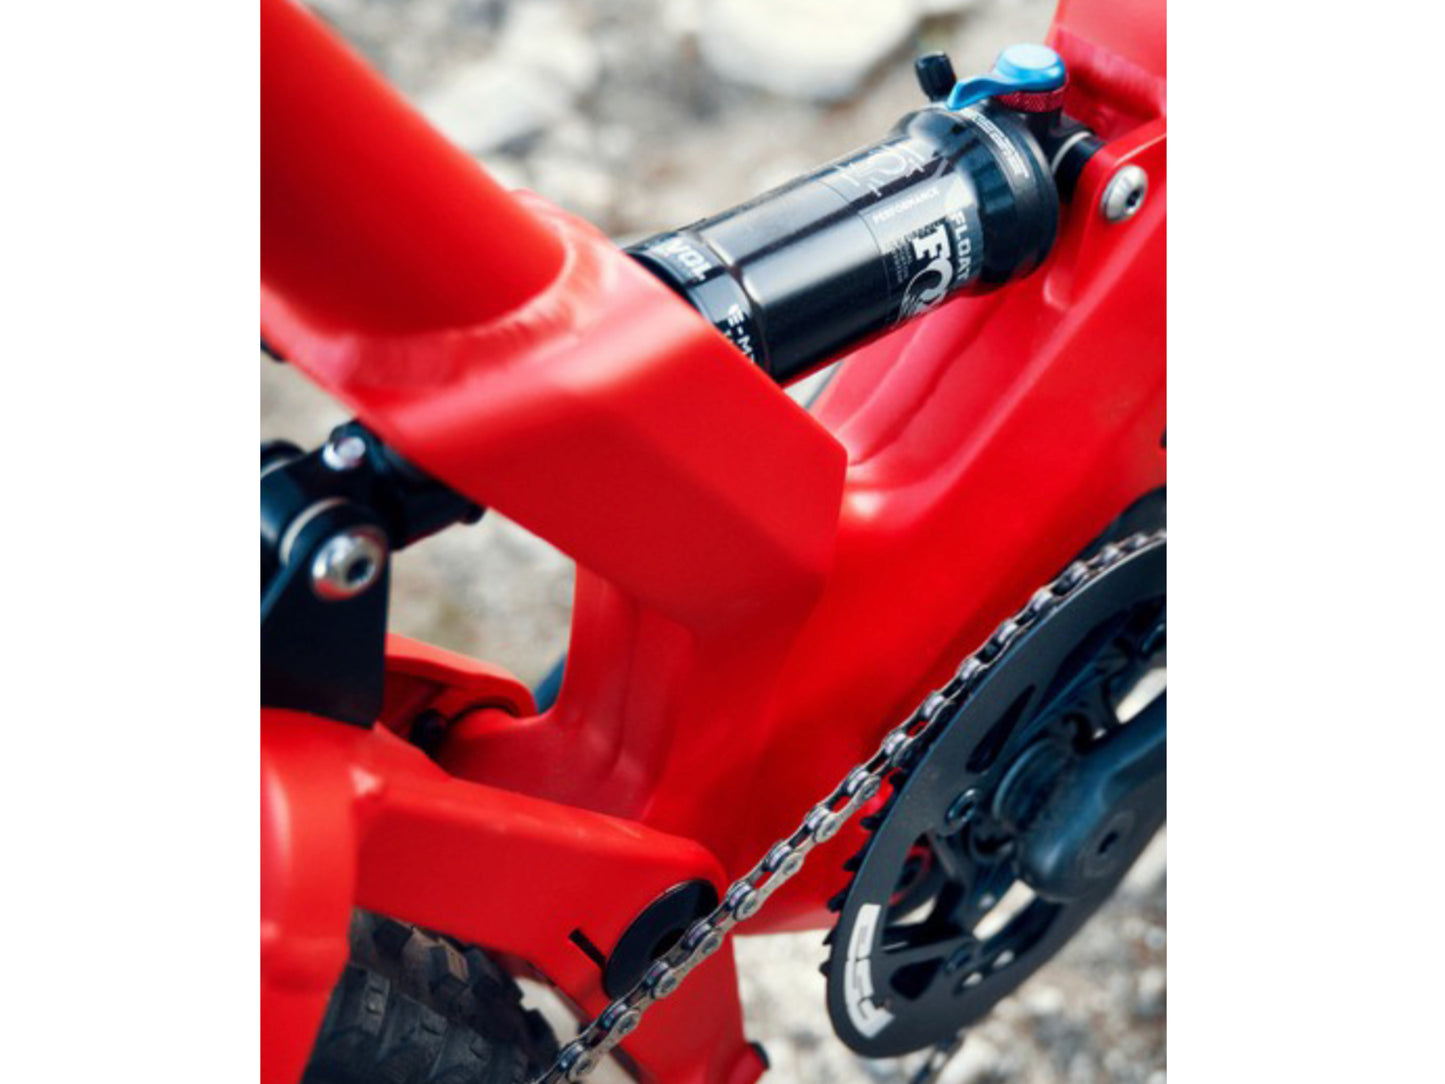 Riese and Muller Delite Mountain Touring eMTB full suspension close up rear shock frame